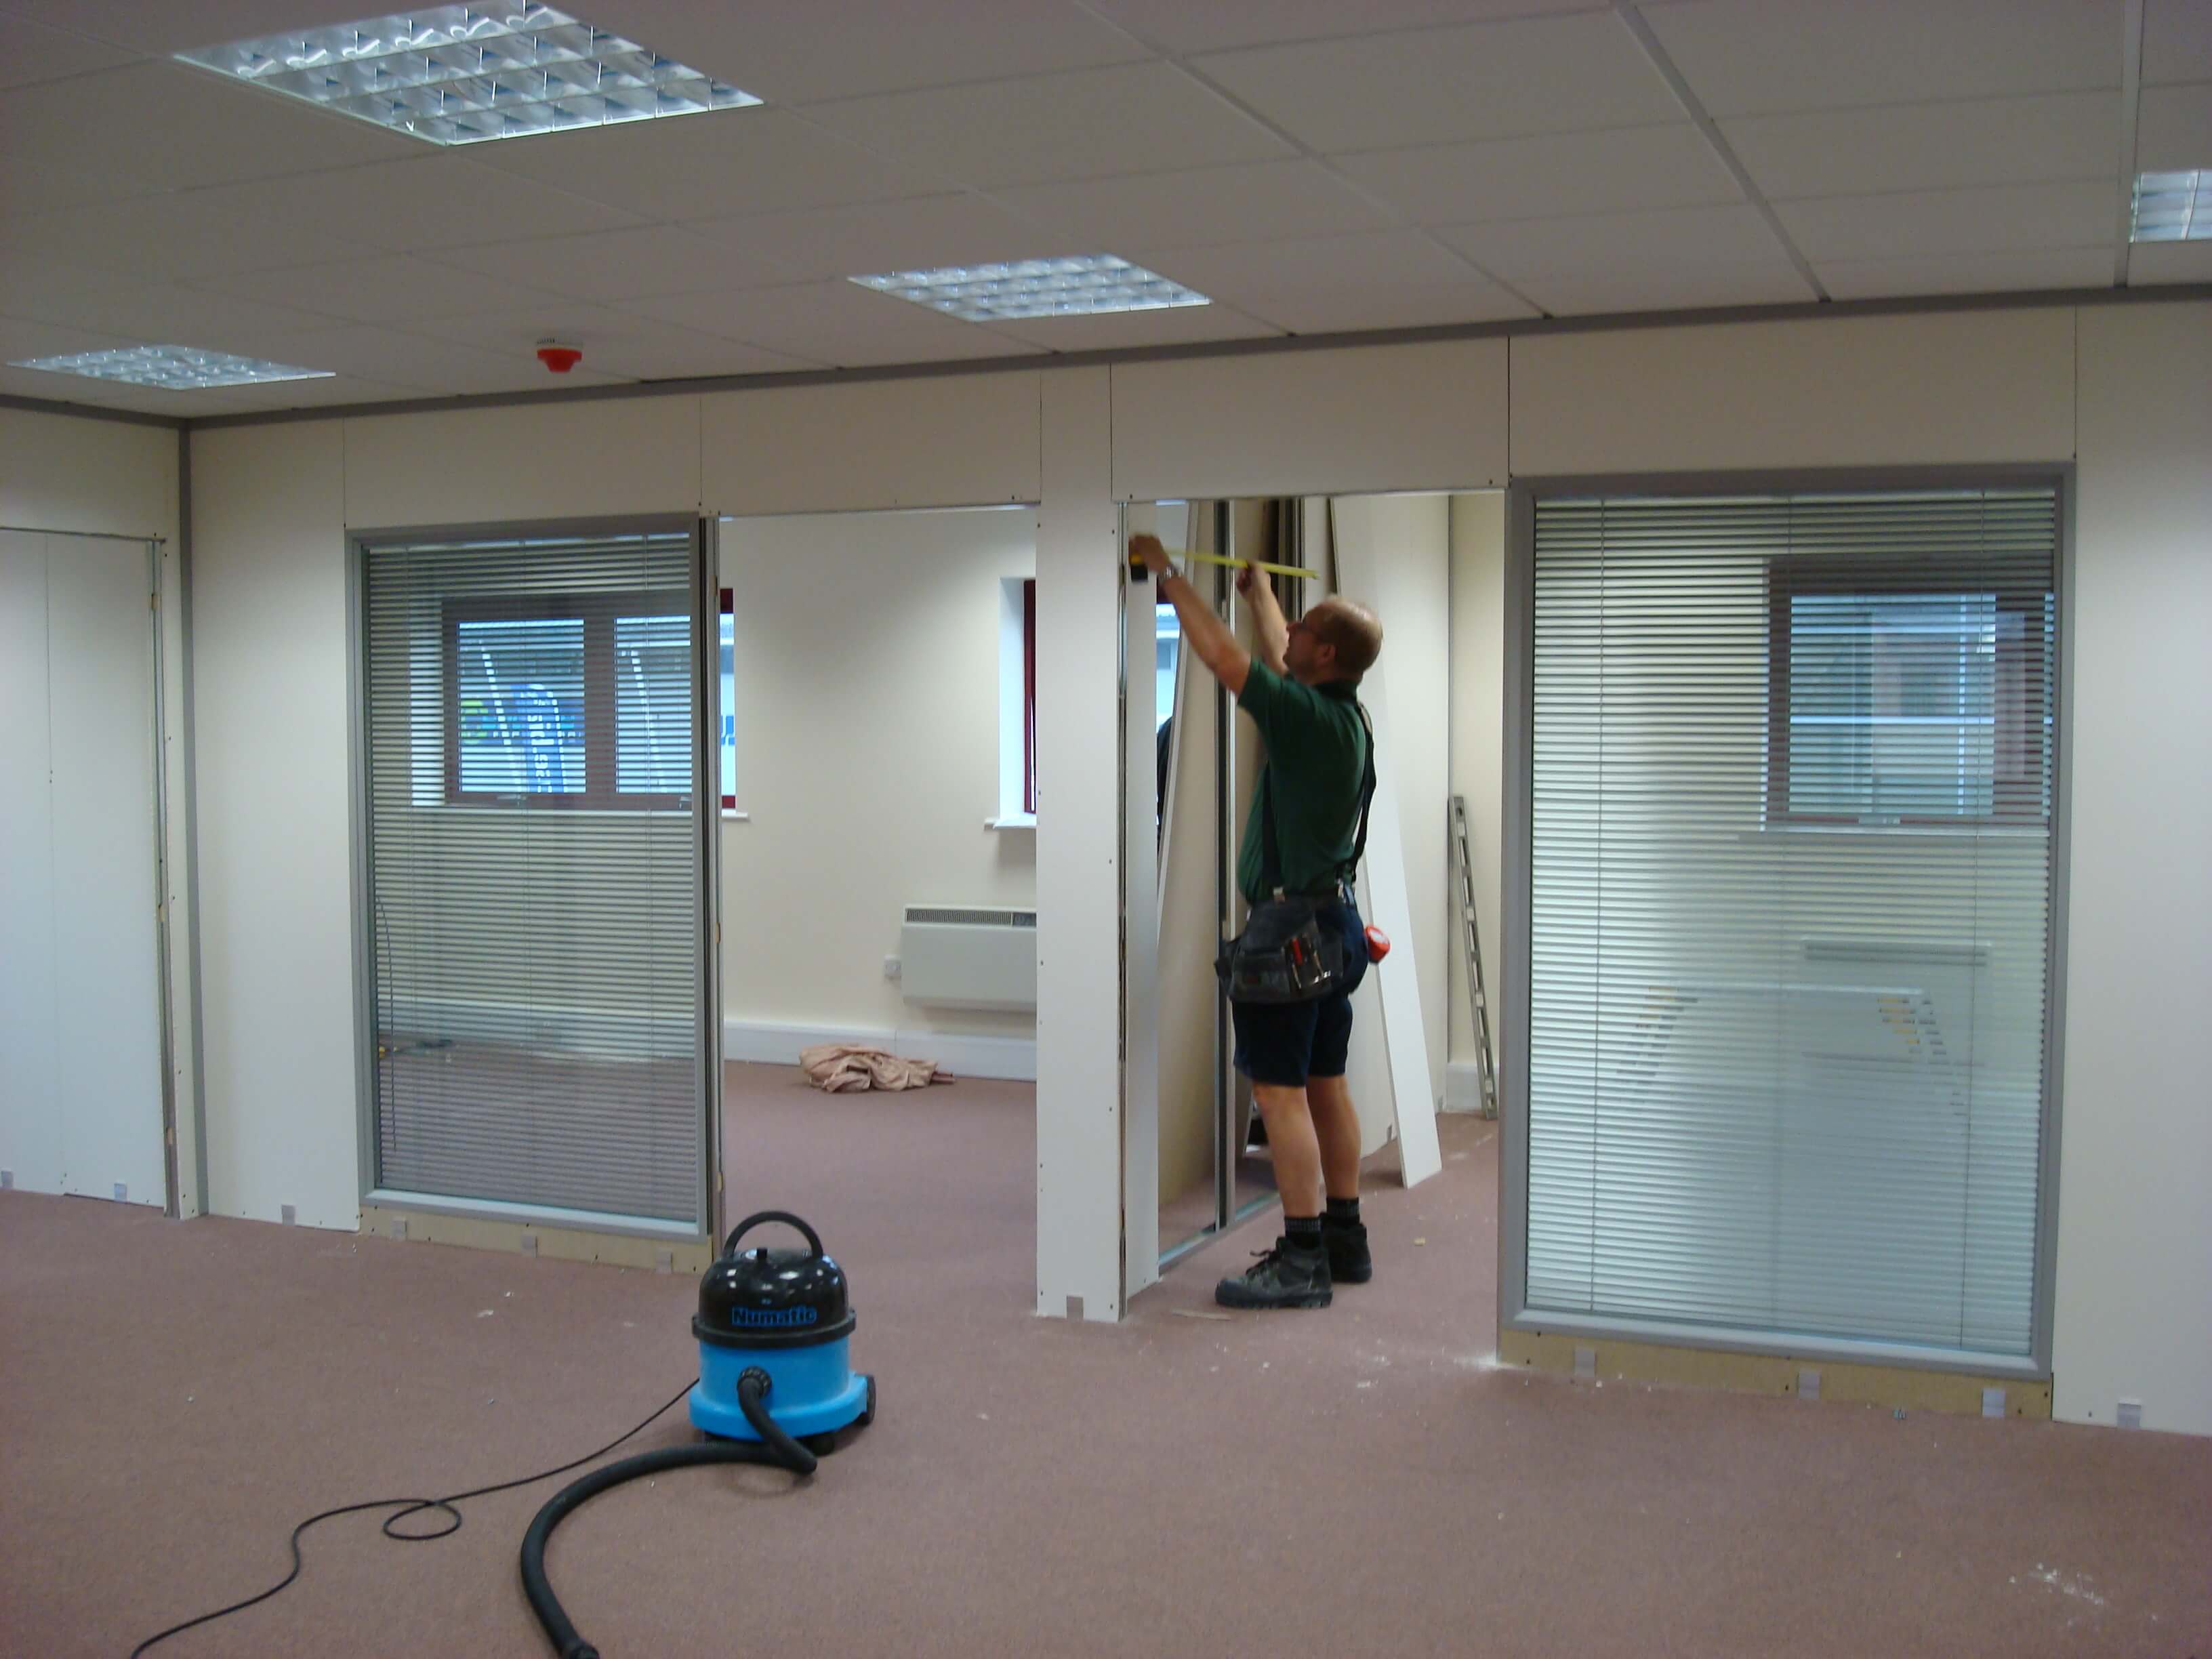 Office fit out for John Hodge Solicitors in Weston Super Mare